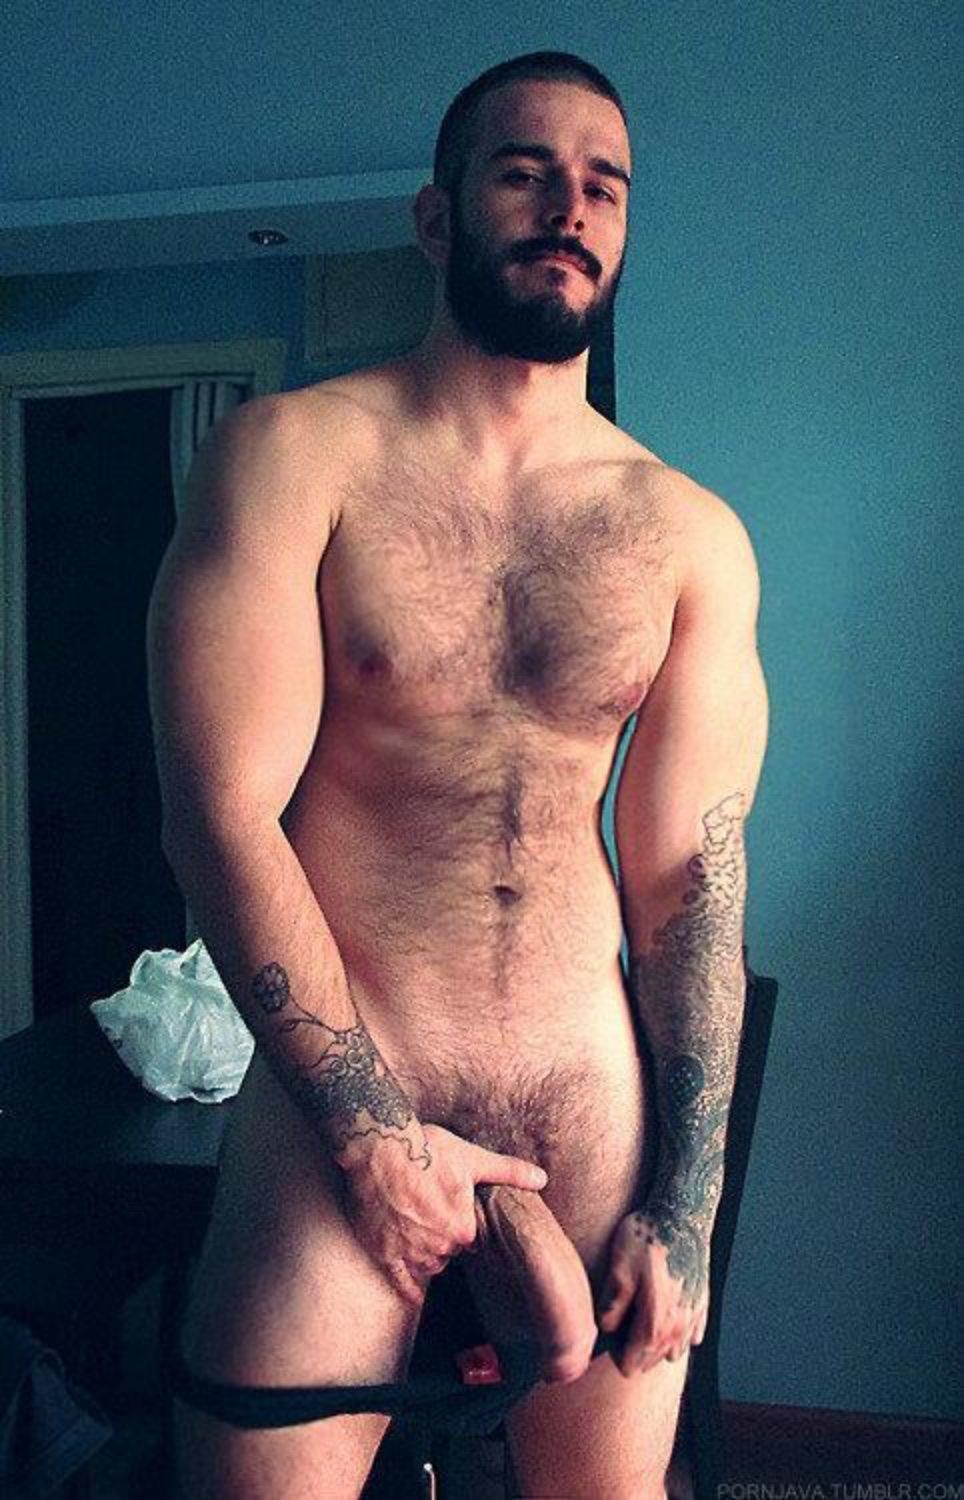 ♺ Mostly Hairy Alpha Hunks to Admire v1.